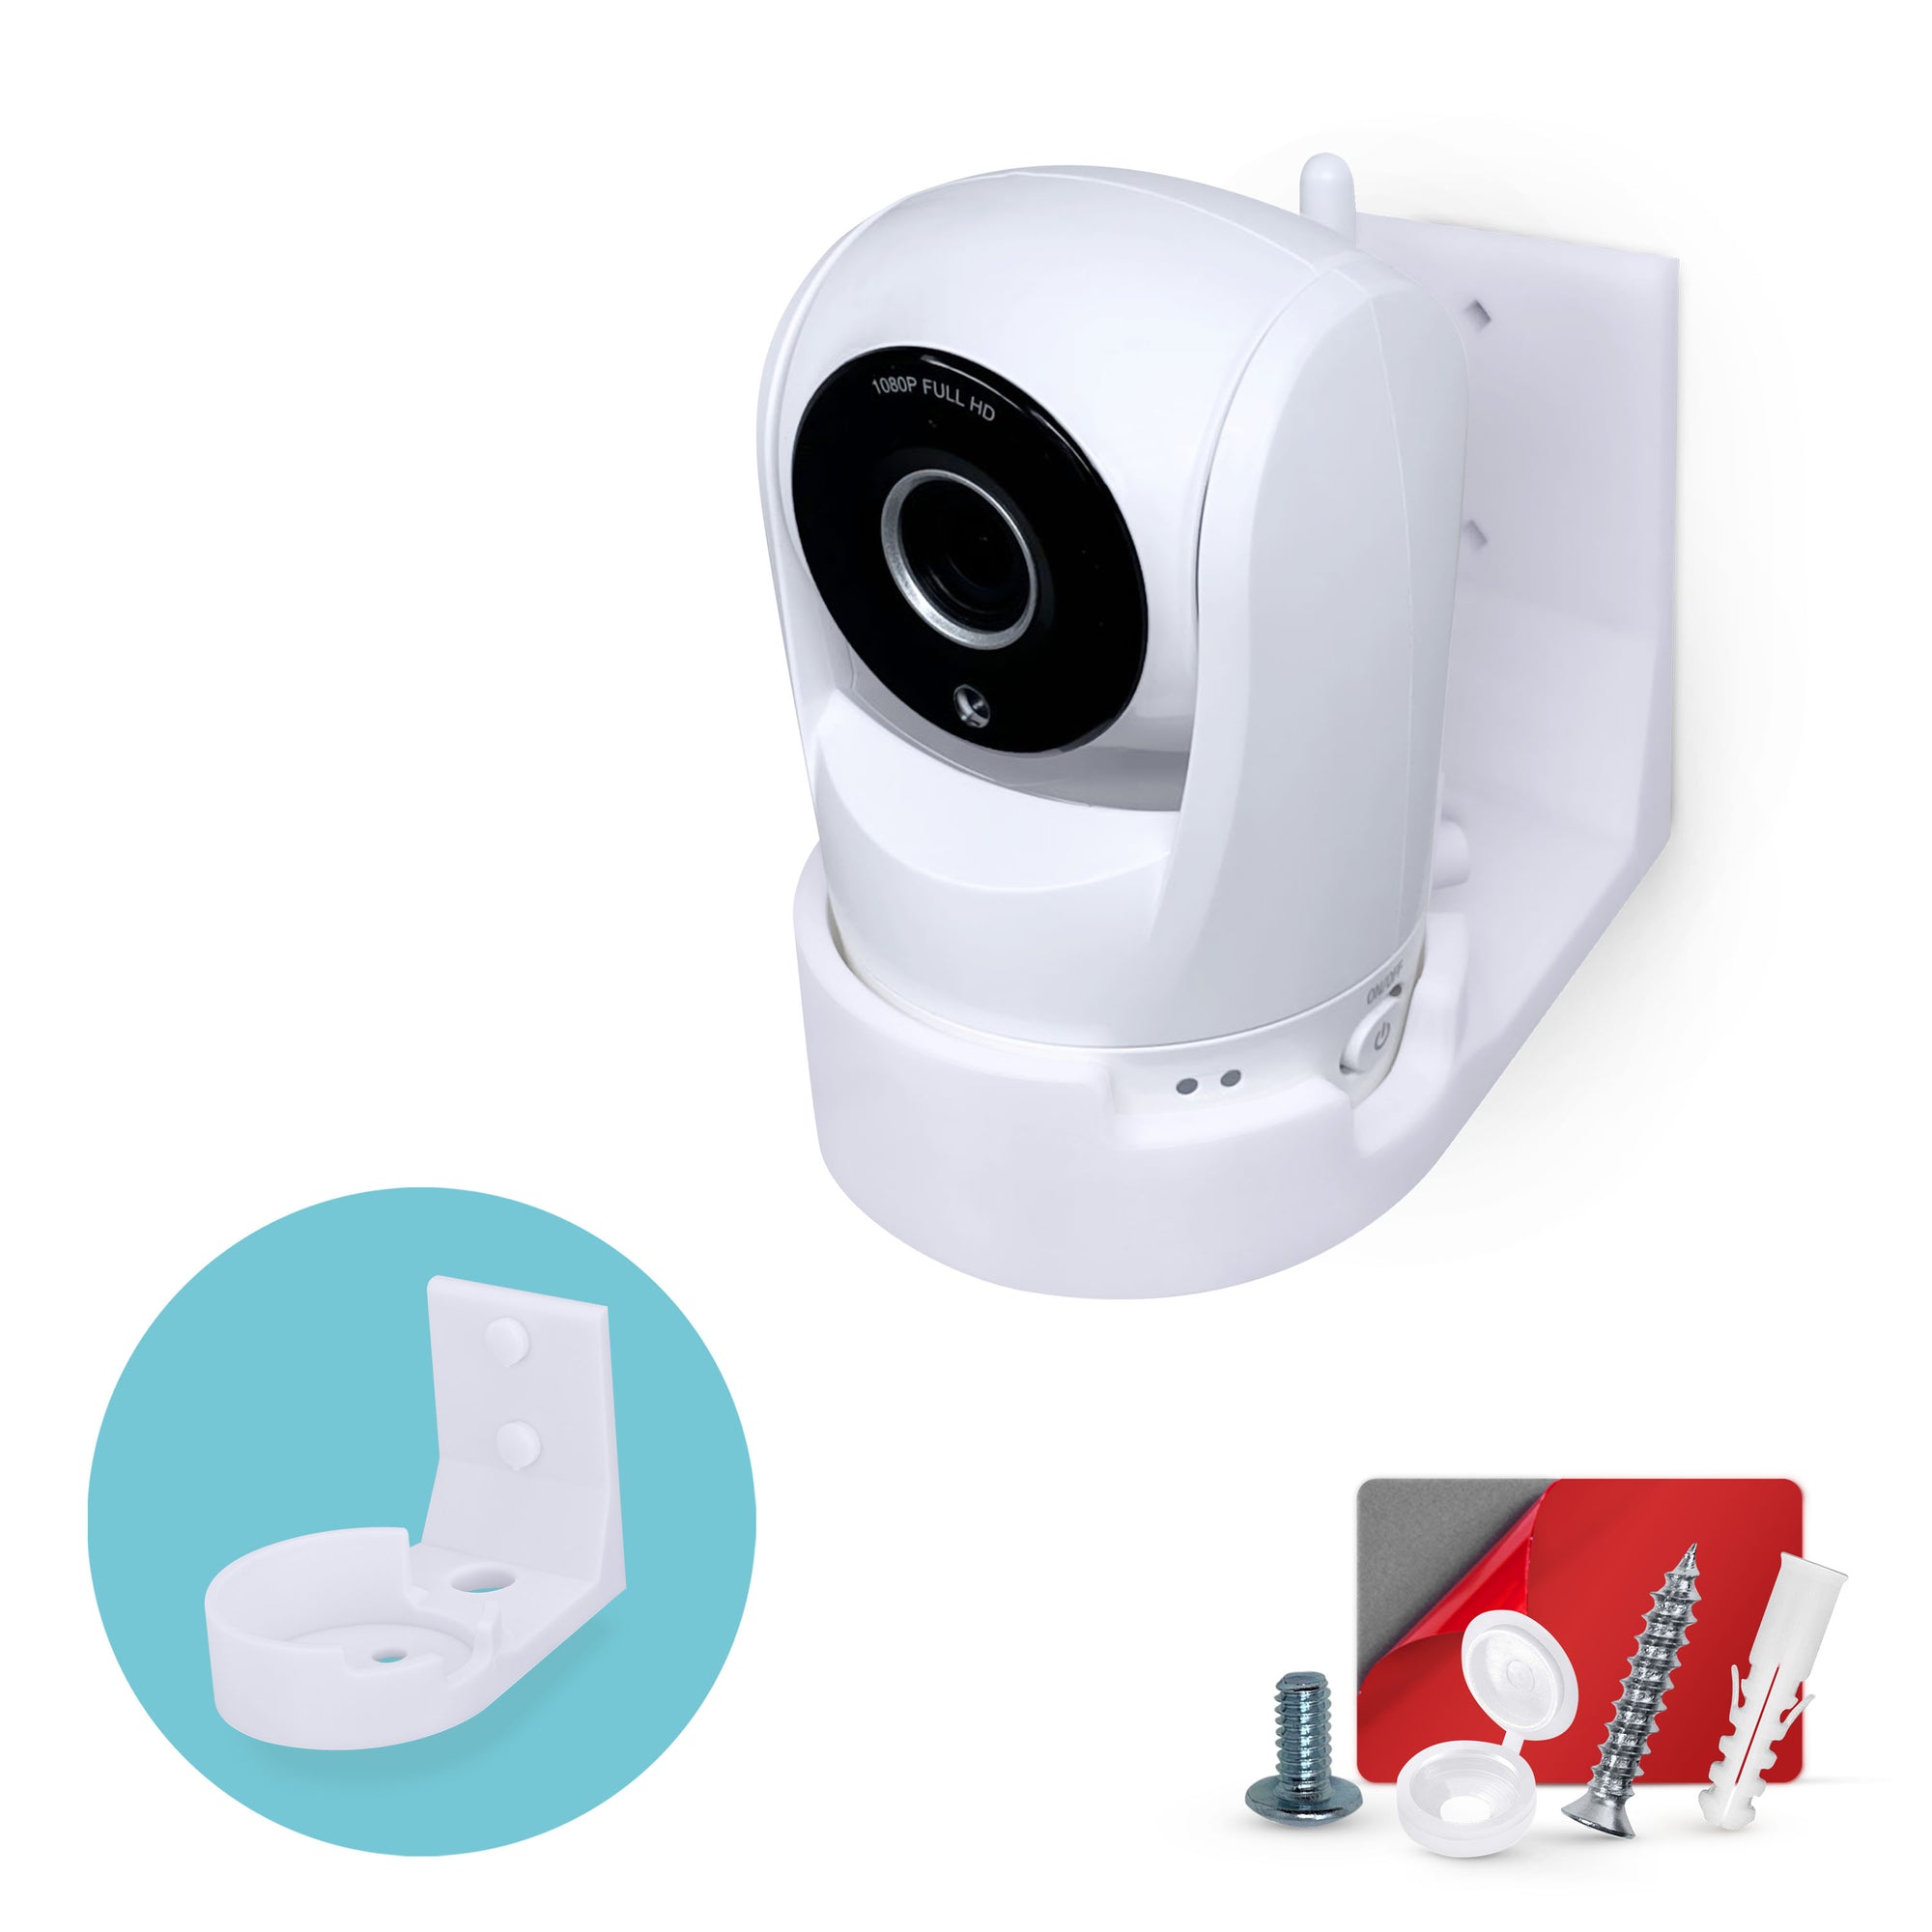 Drill Free Wall Mount For VTech ‎VM901 Camera, Easy To Install Holder with Strong Adhesive, No Mess, Reduces Blind Spots & Clutter